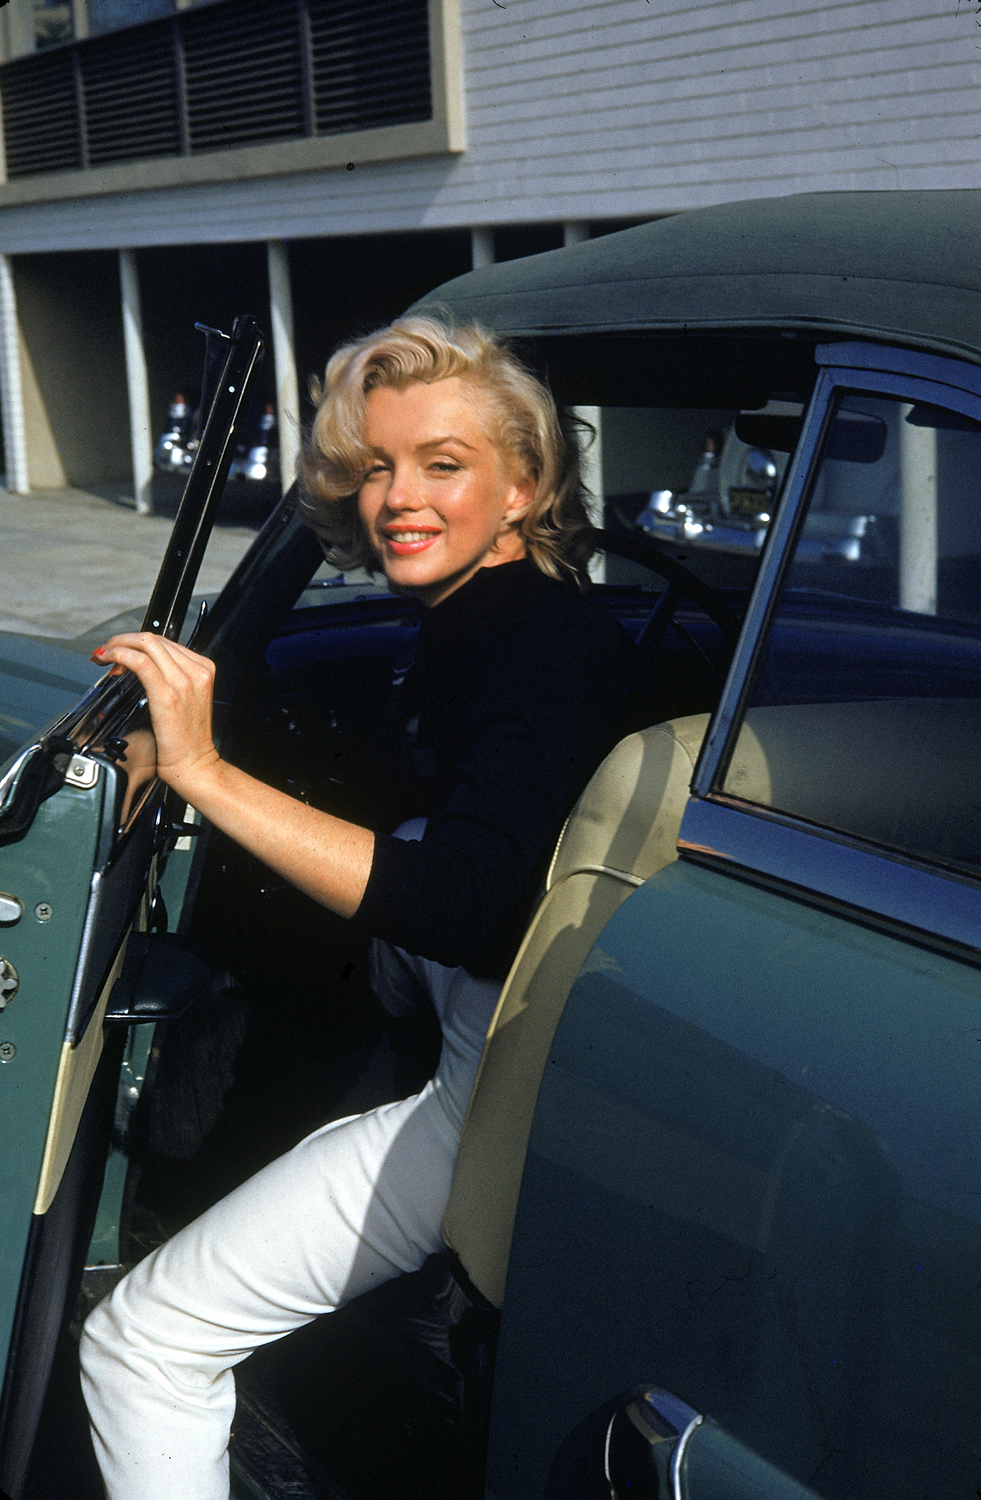 Monroe getting out of a car.